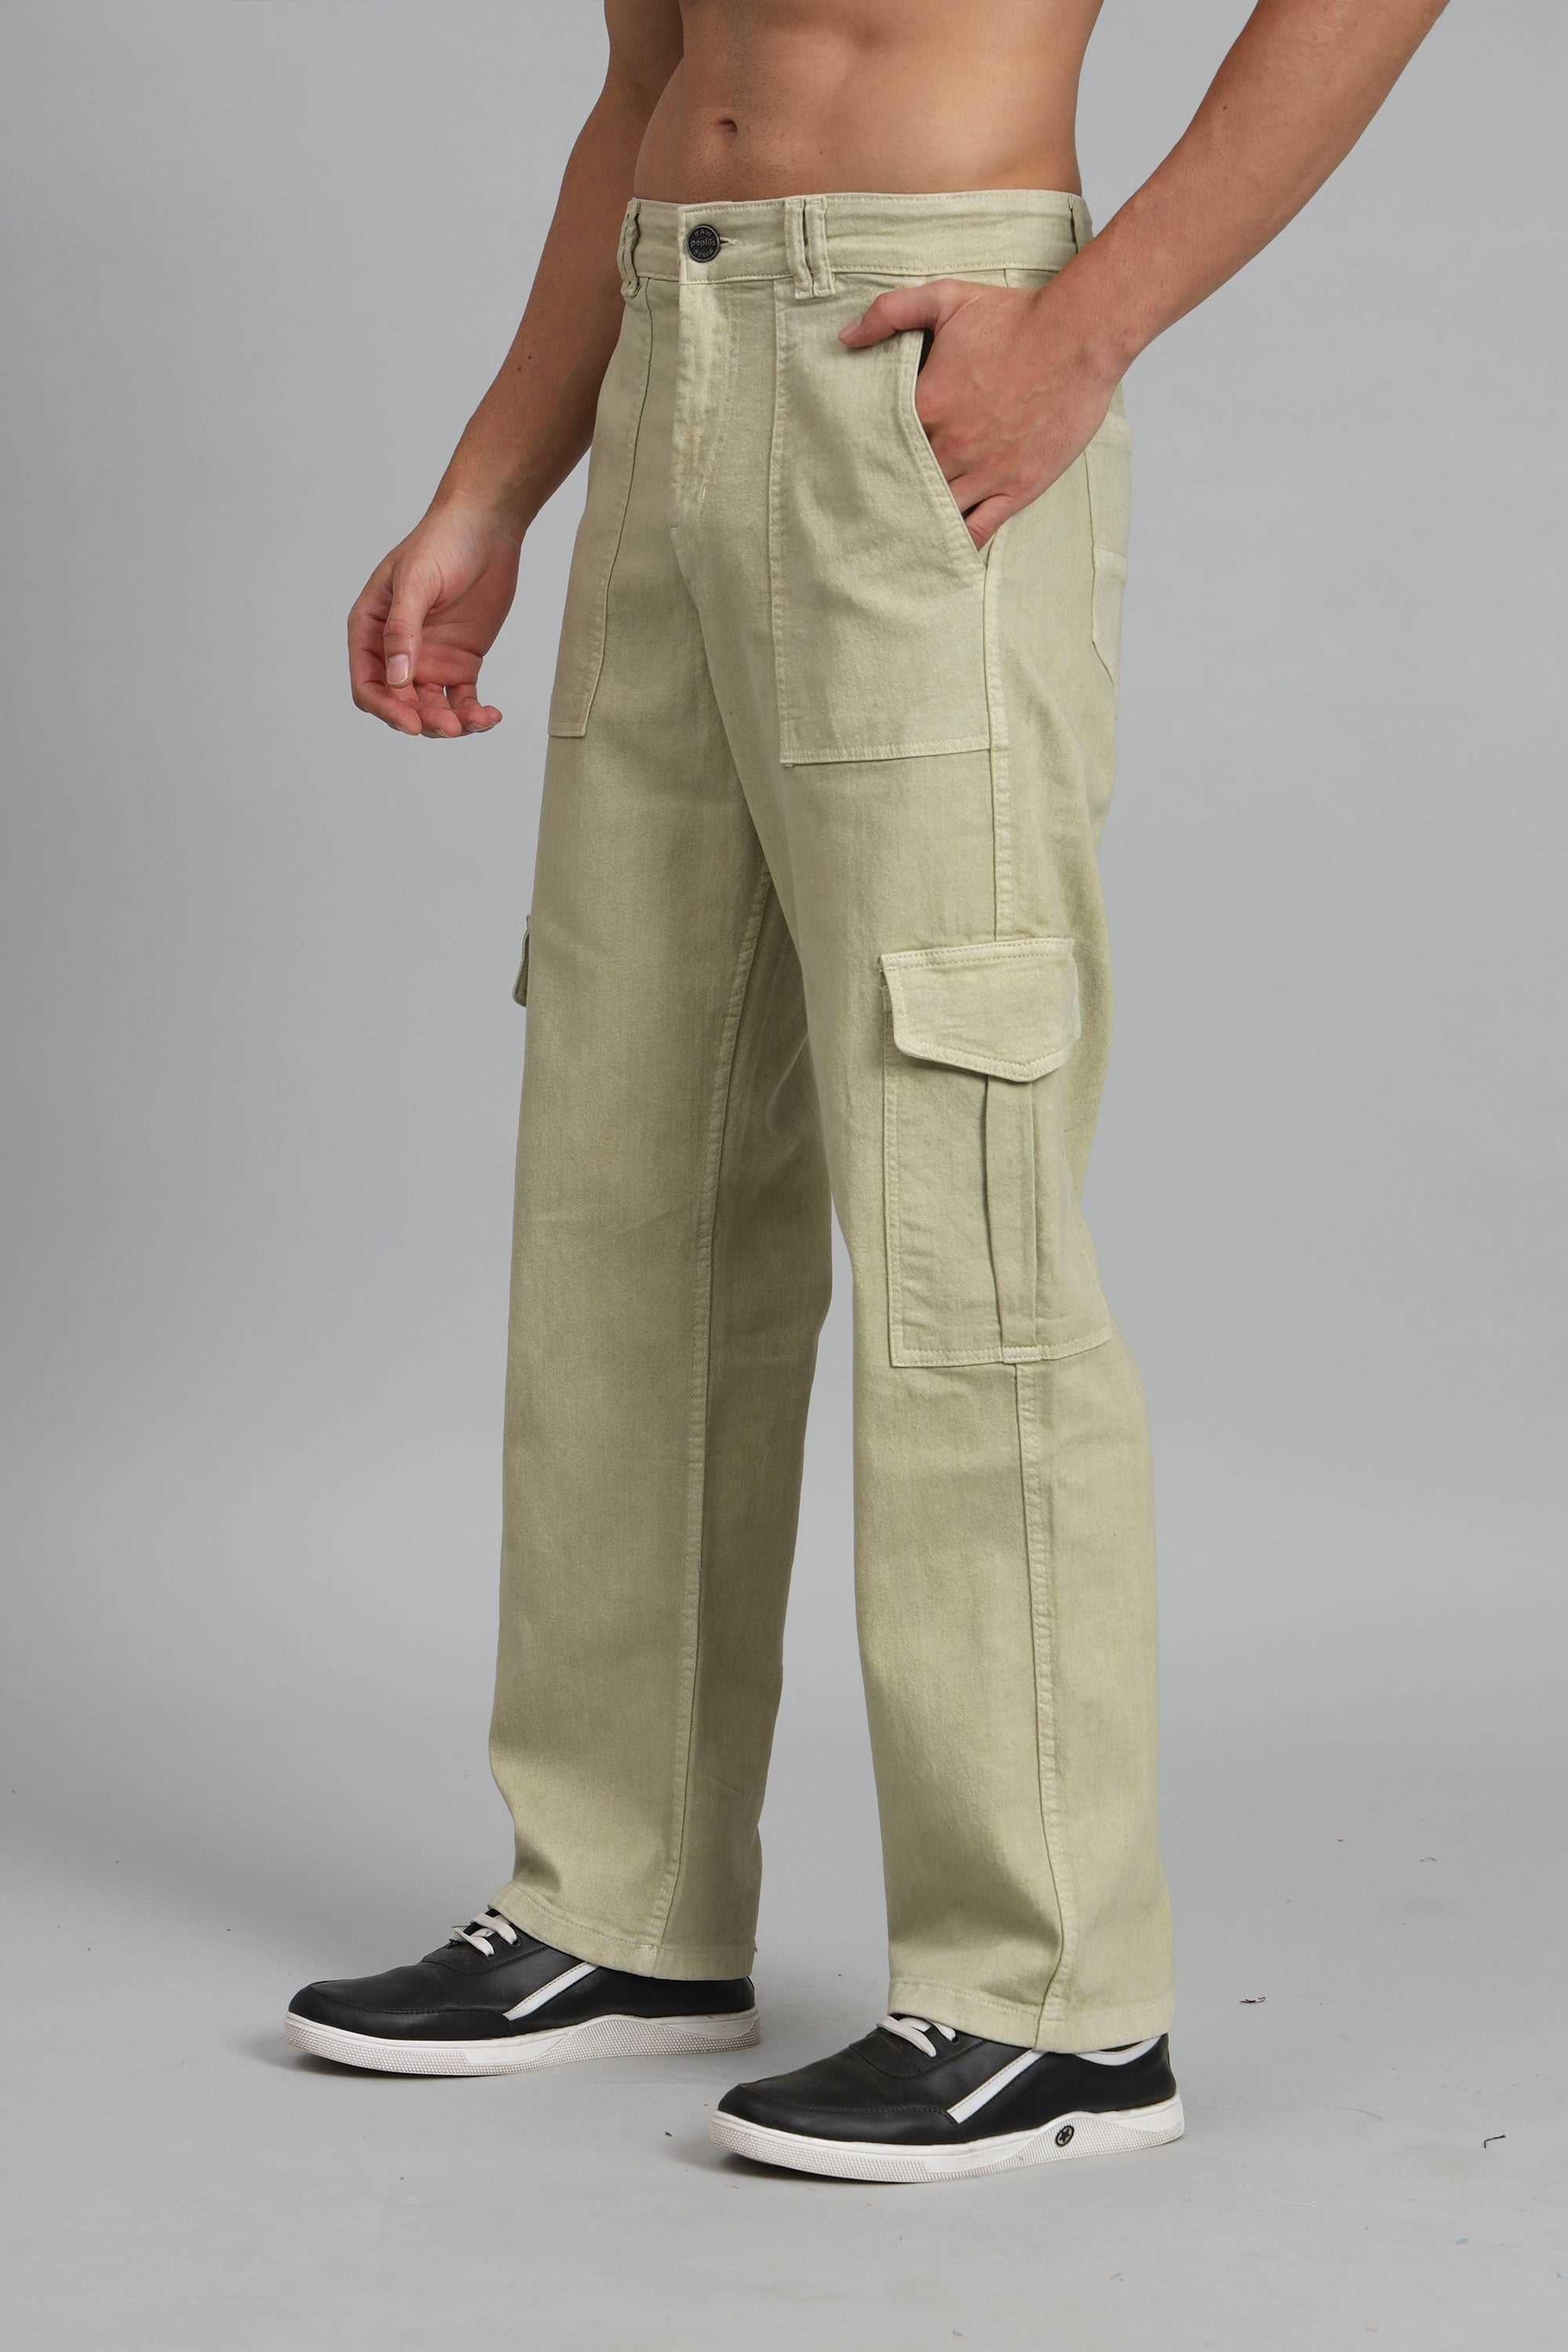 mens military style cargo pants in gold with studs and crystals